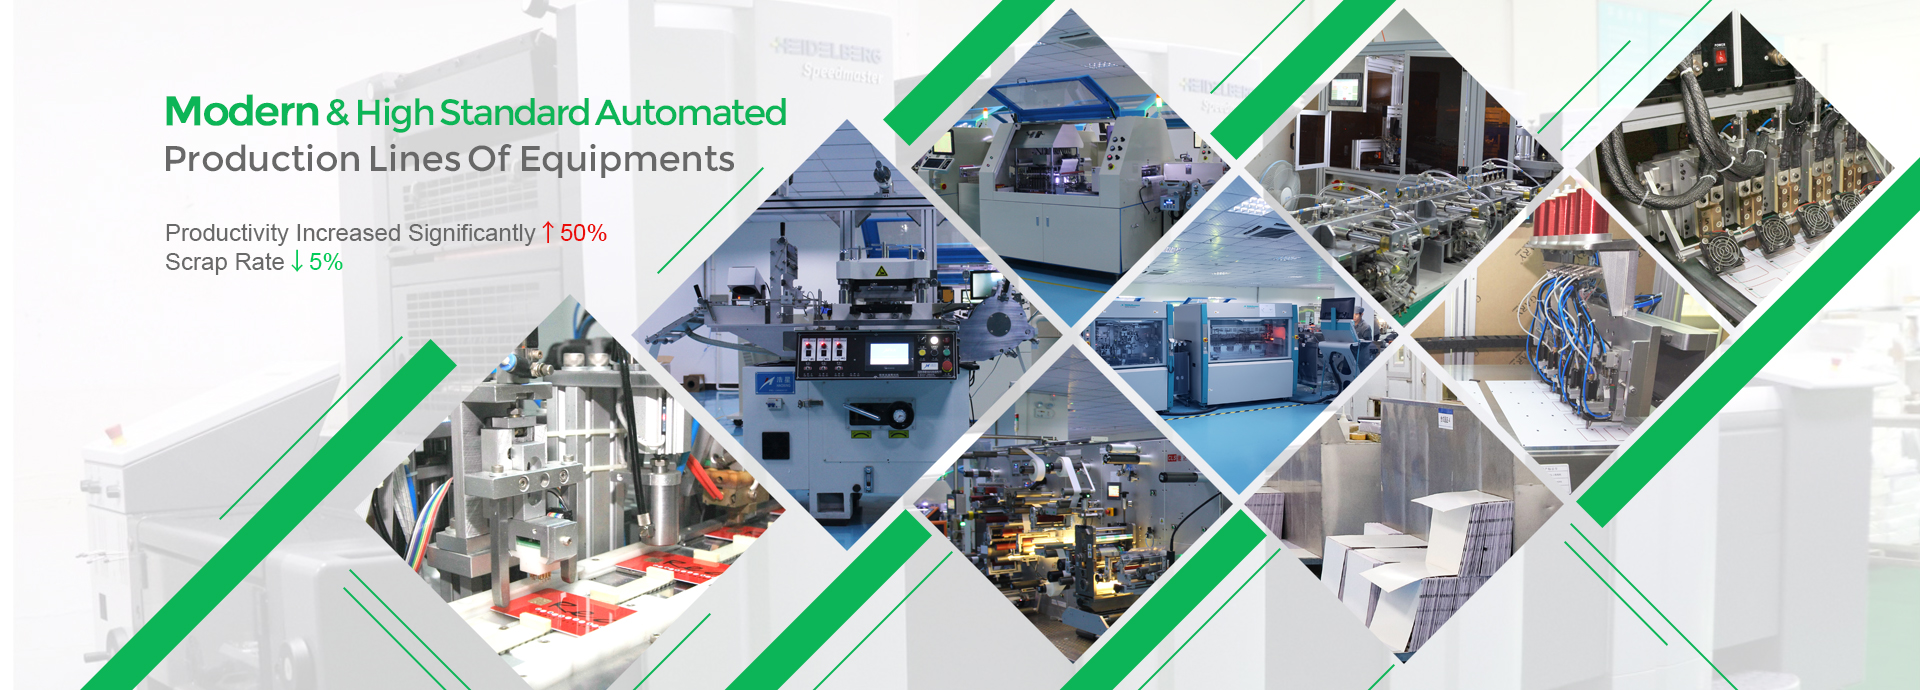 Our Smart Card Production Equipment